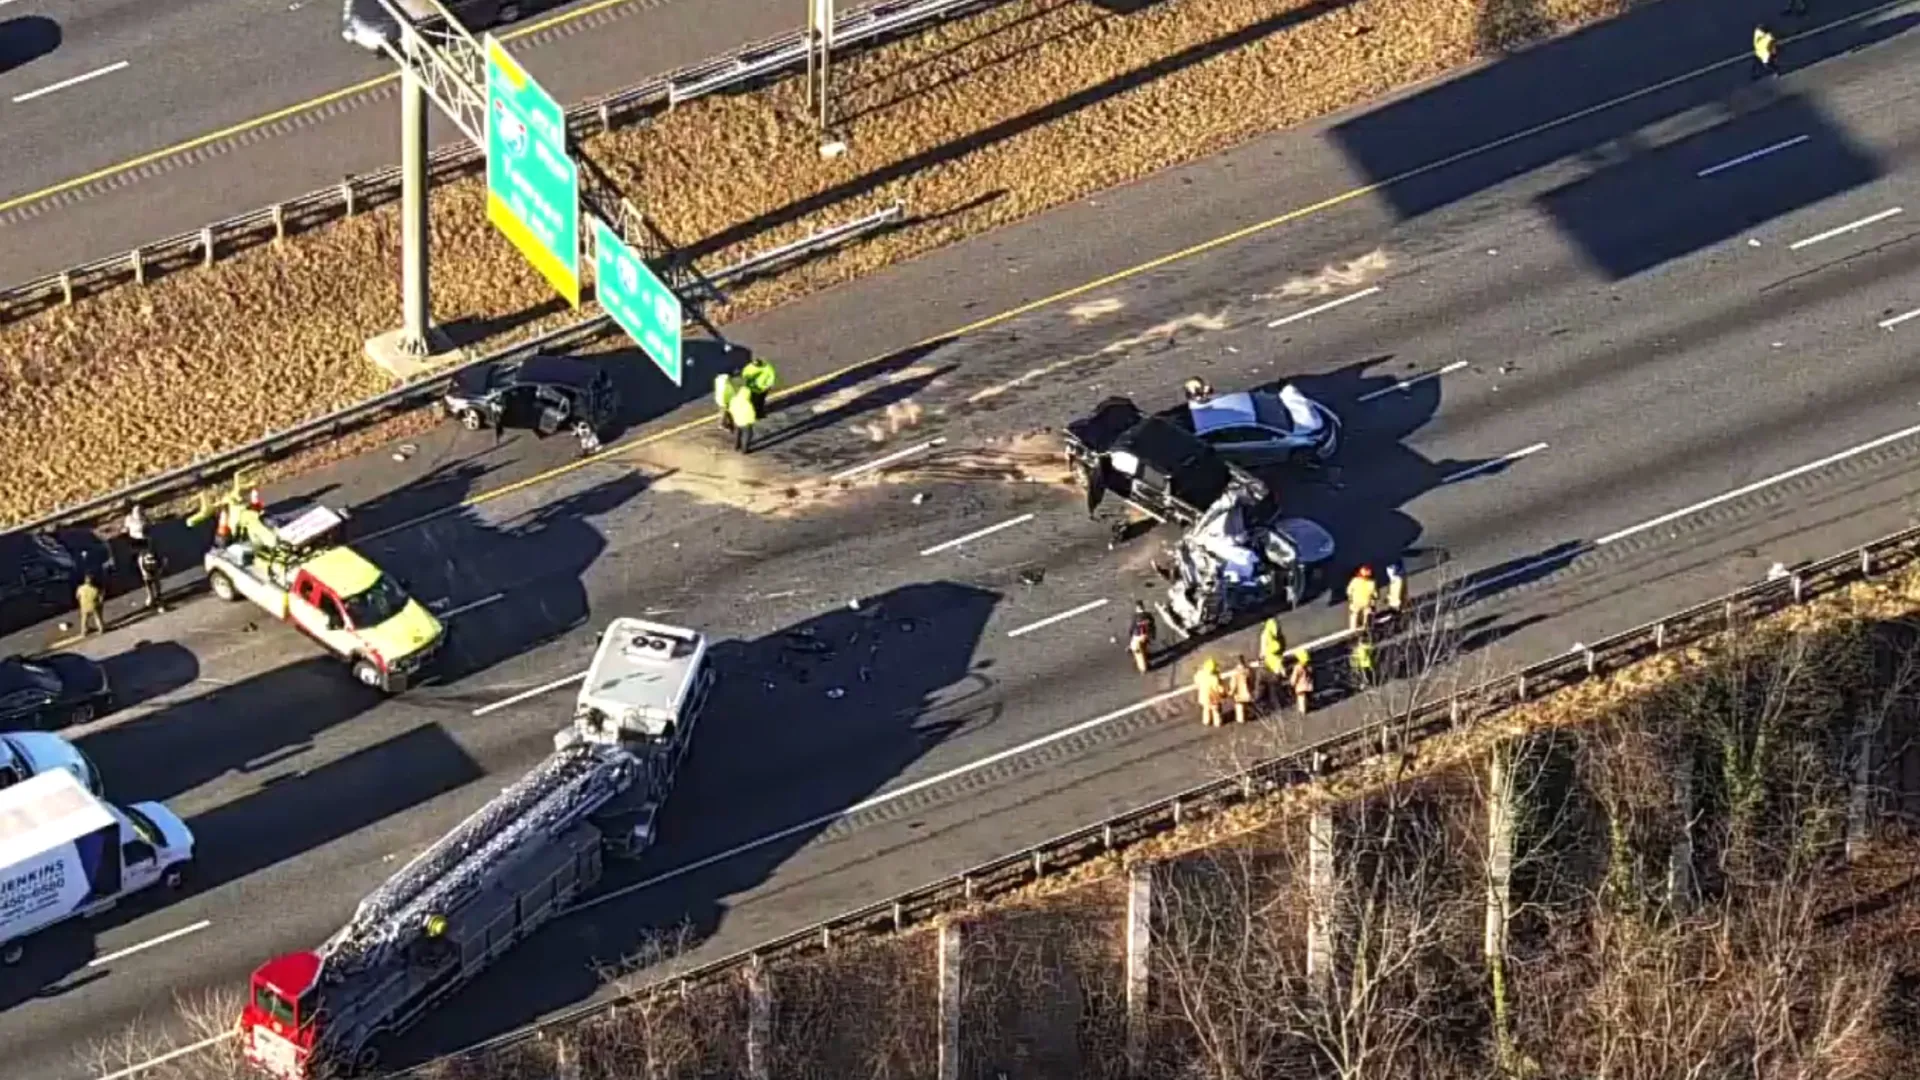 Maryland Highway Administration cited for'serious infractions' in I-695 crash that killed 6 workers.